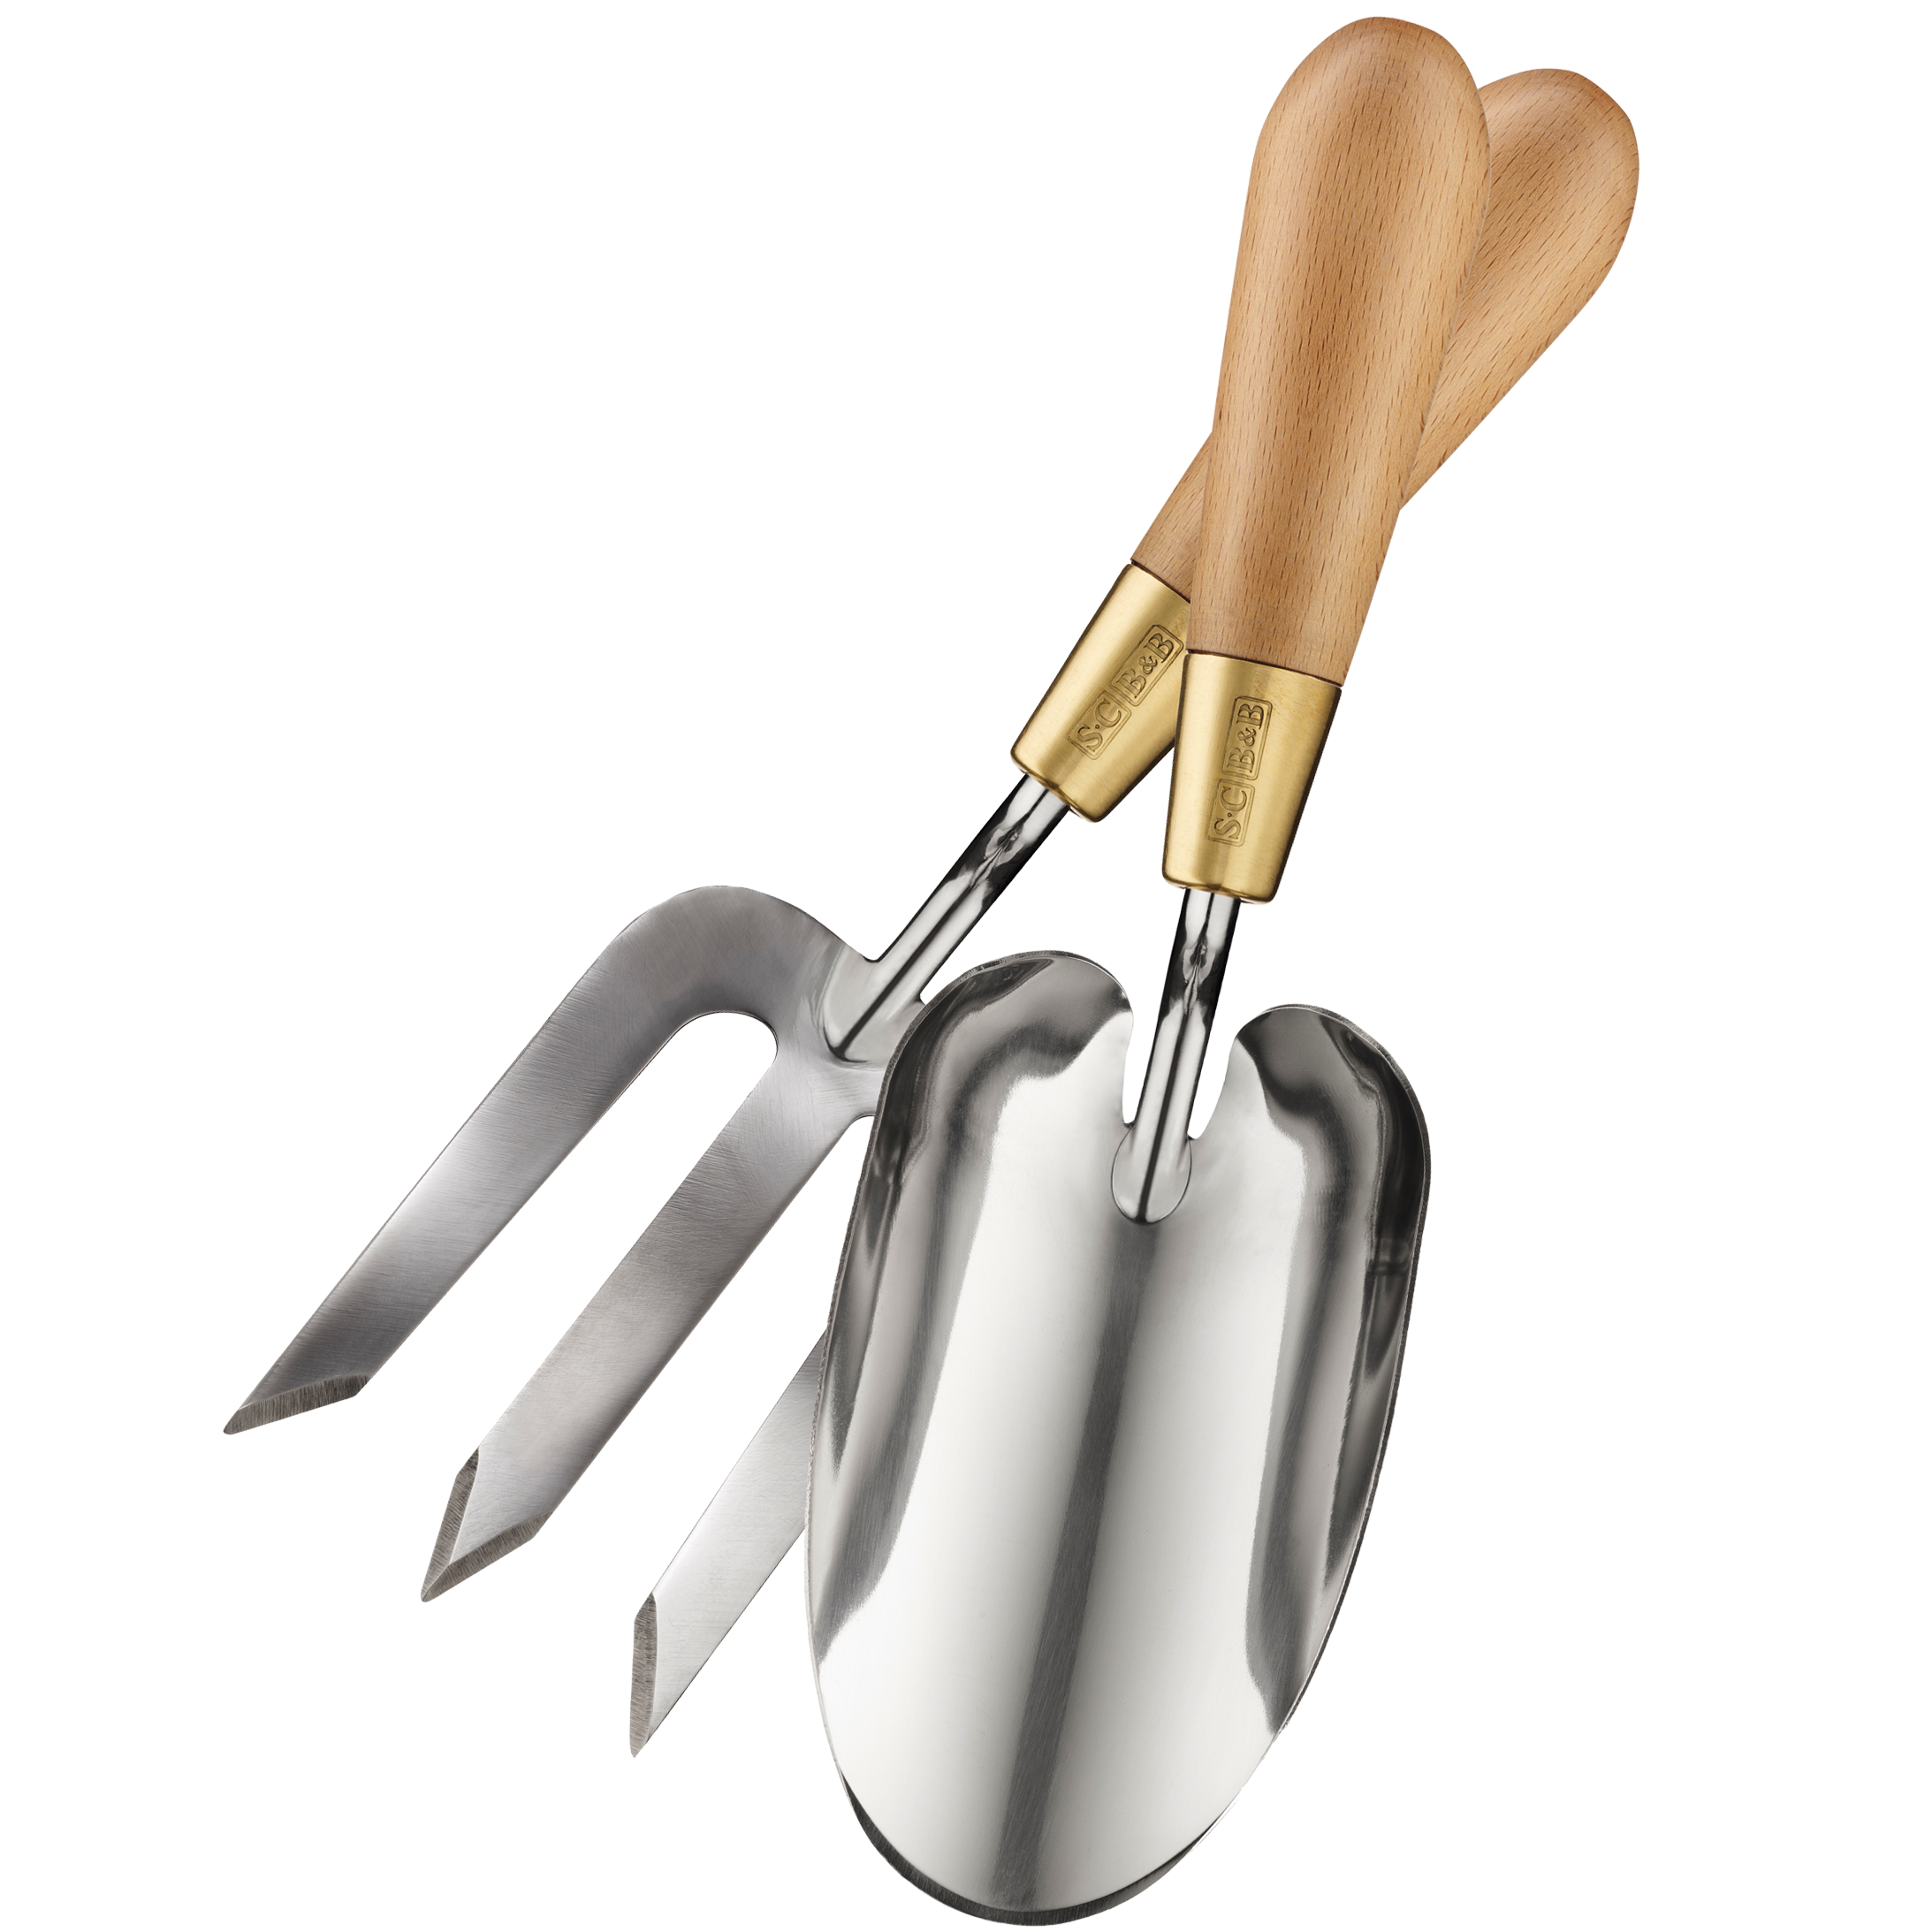 Garden Tools PNG File HD PNG Image